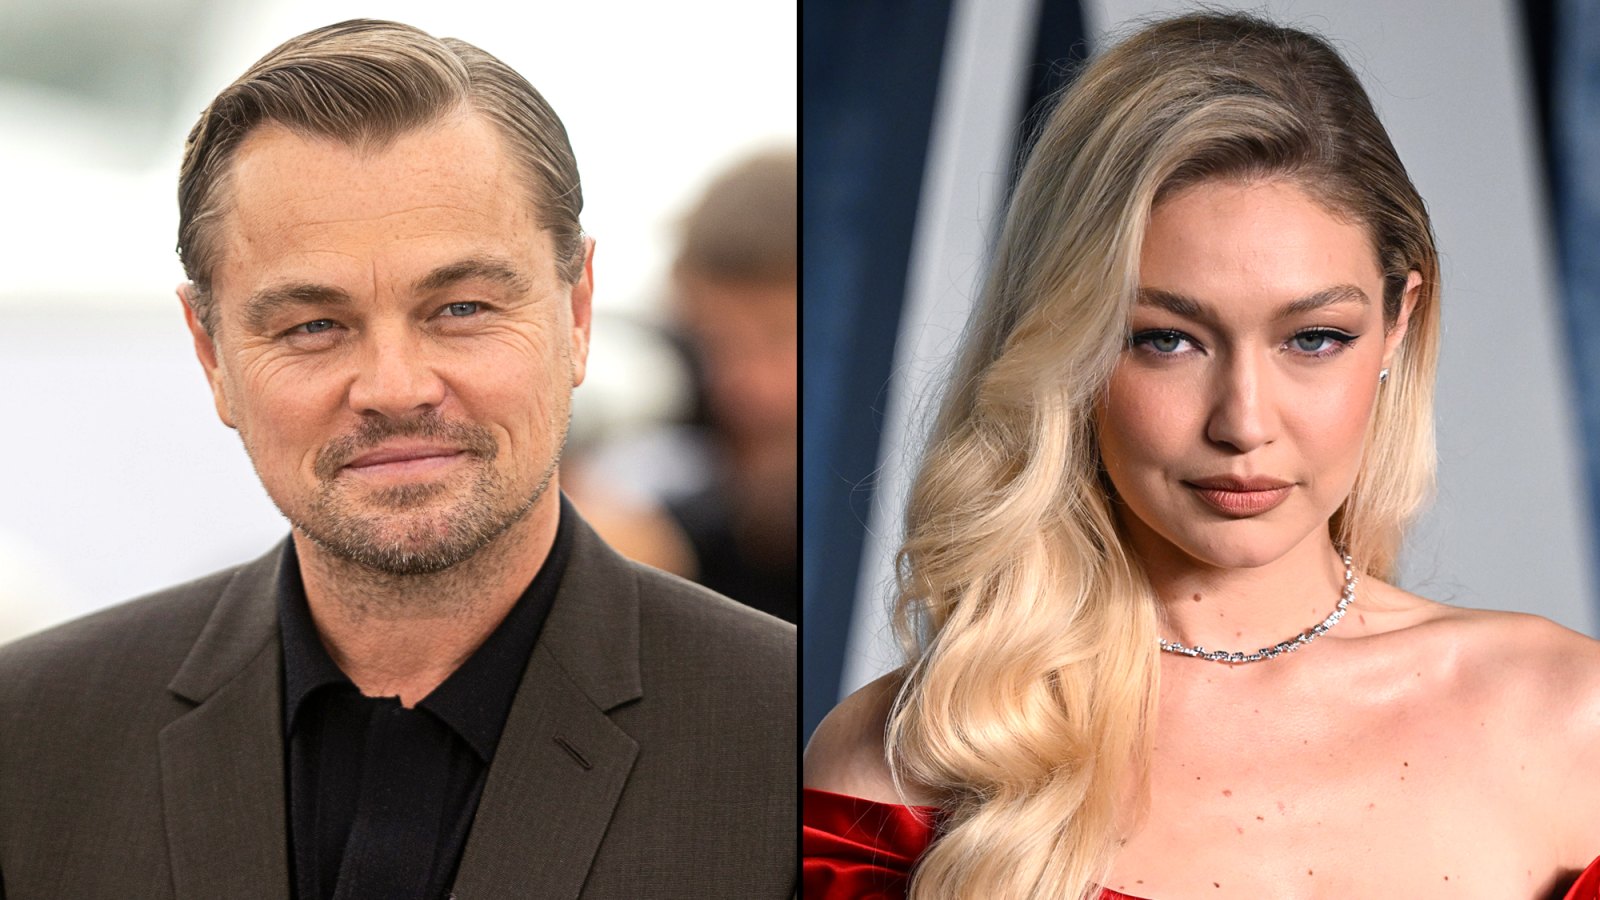 Leonardo DiCaprio and Gigi Hadid 'Have Fun,' But She Is 'More Than Happy Living the Single Life'